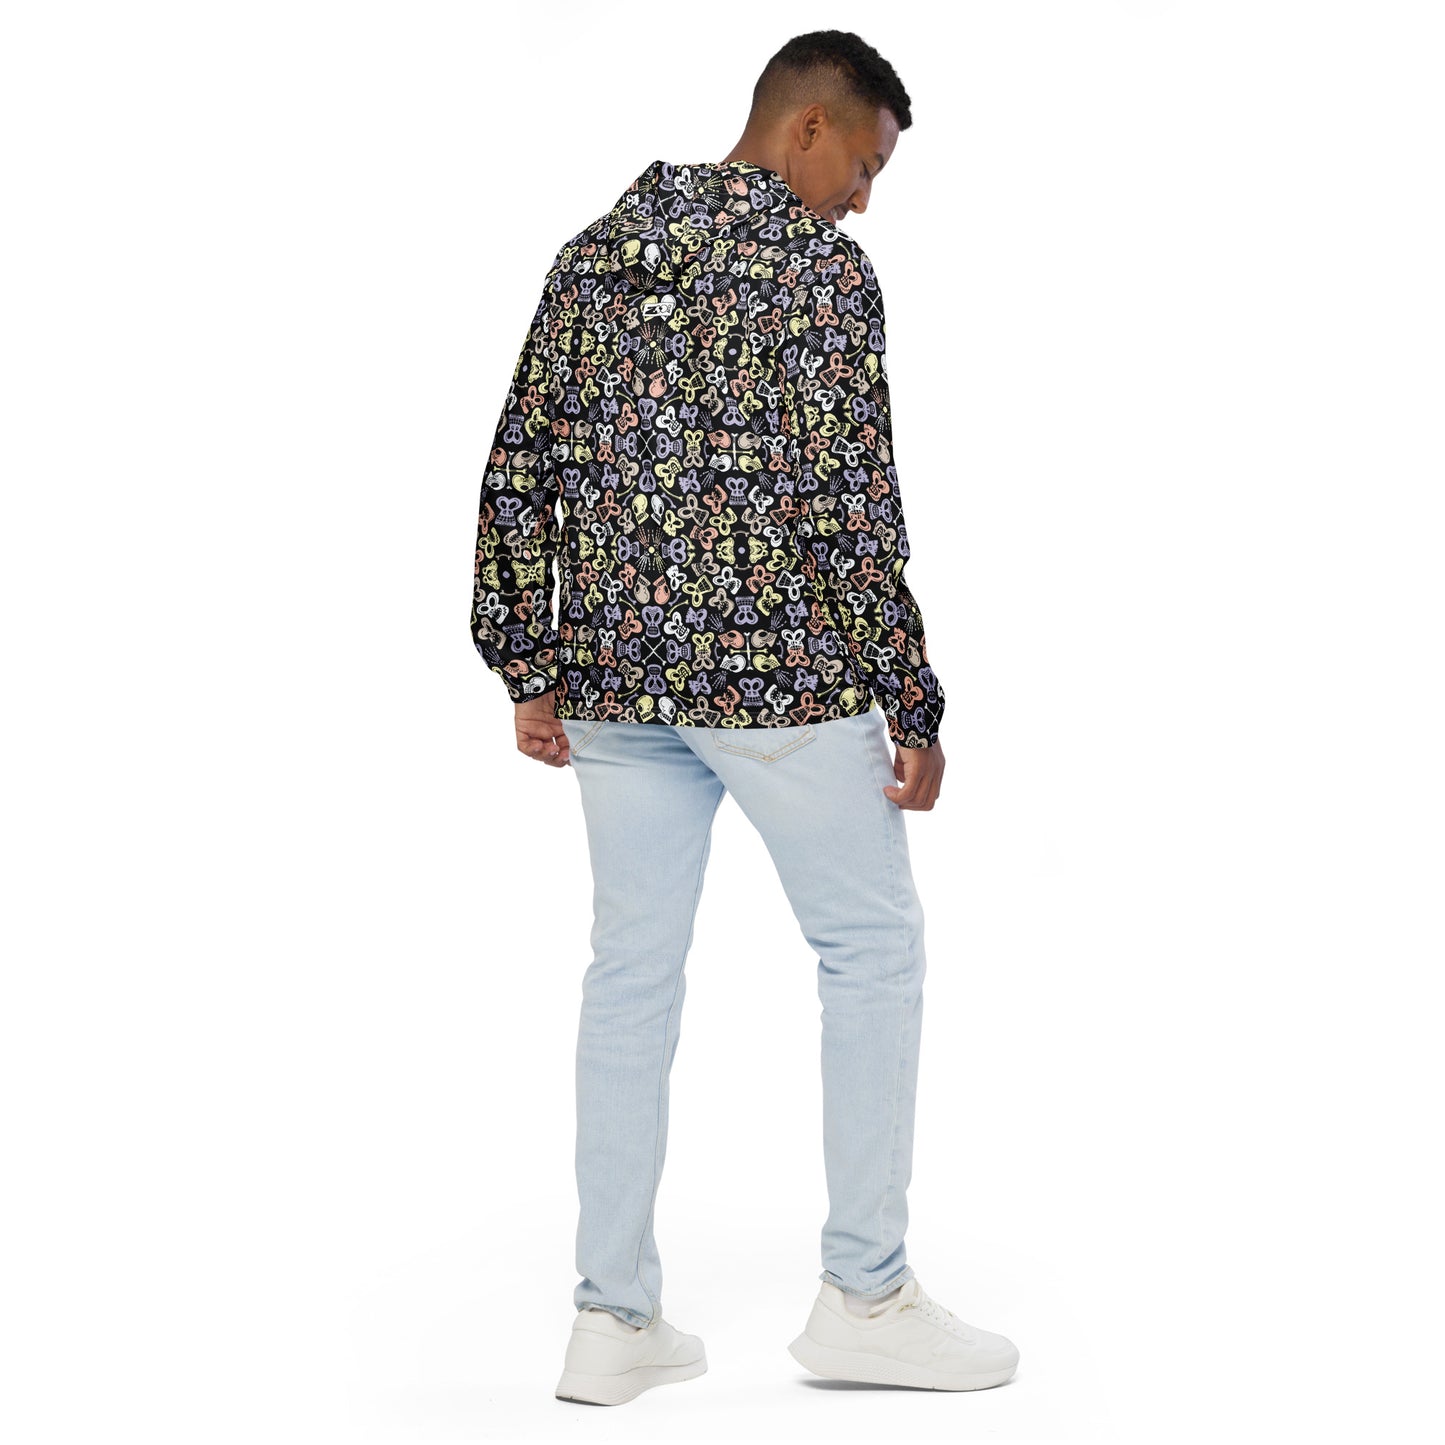 Bewitched Skulls: Hauntingly Chic Pattern Design - Men’s windbreaker. Back view